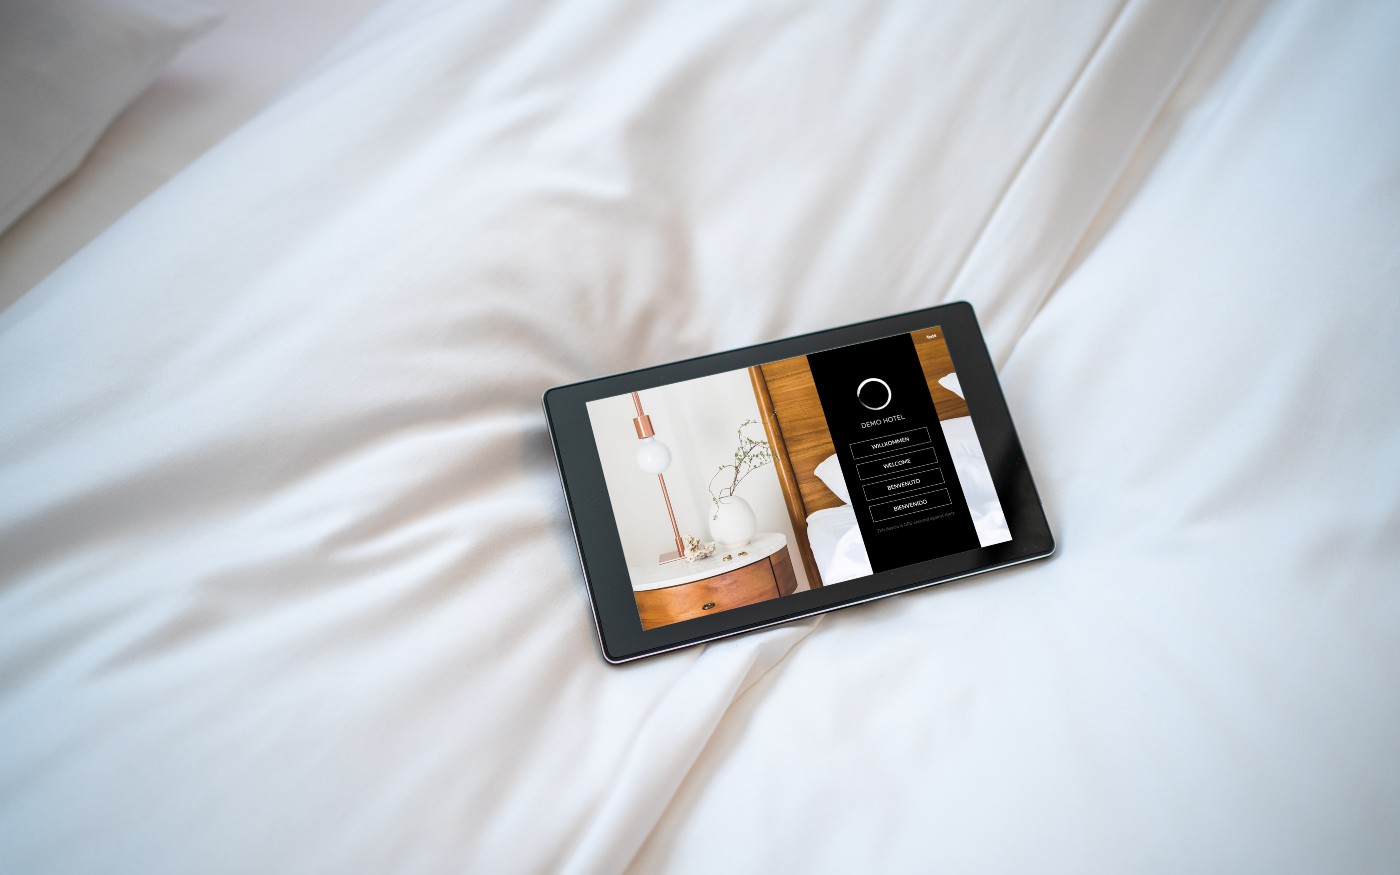 SuitePad tablet on a hotel bed